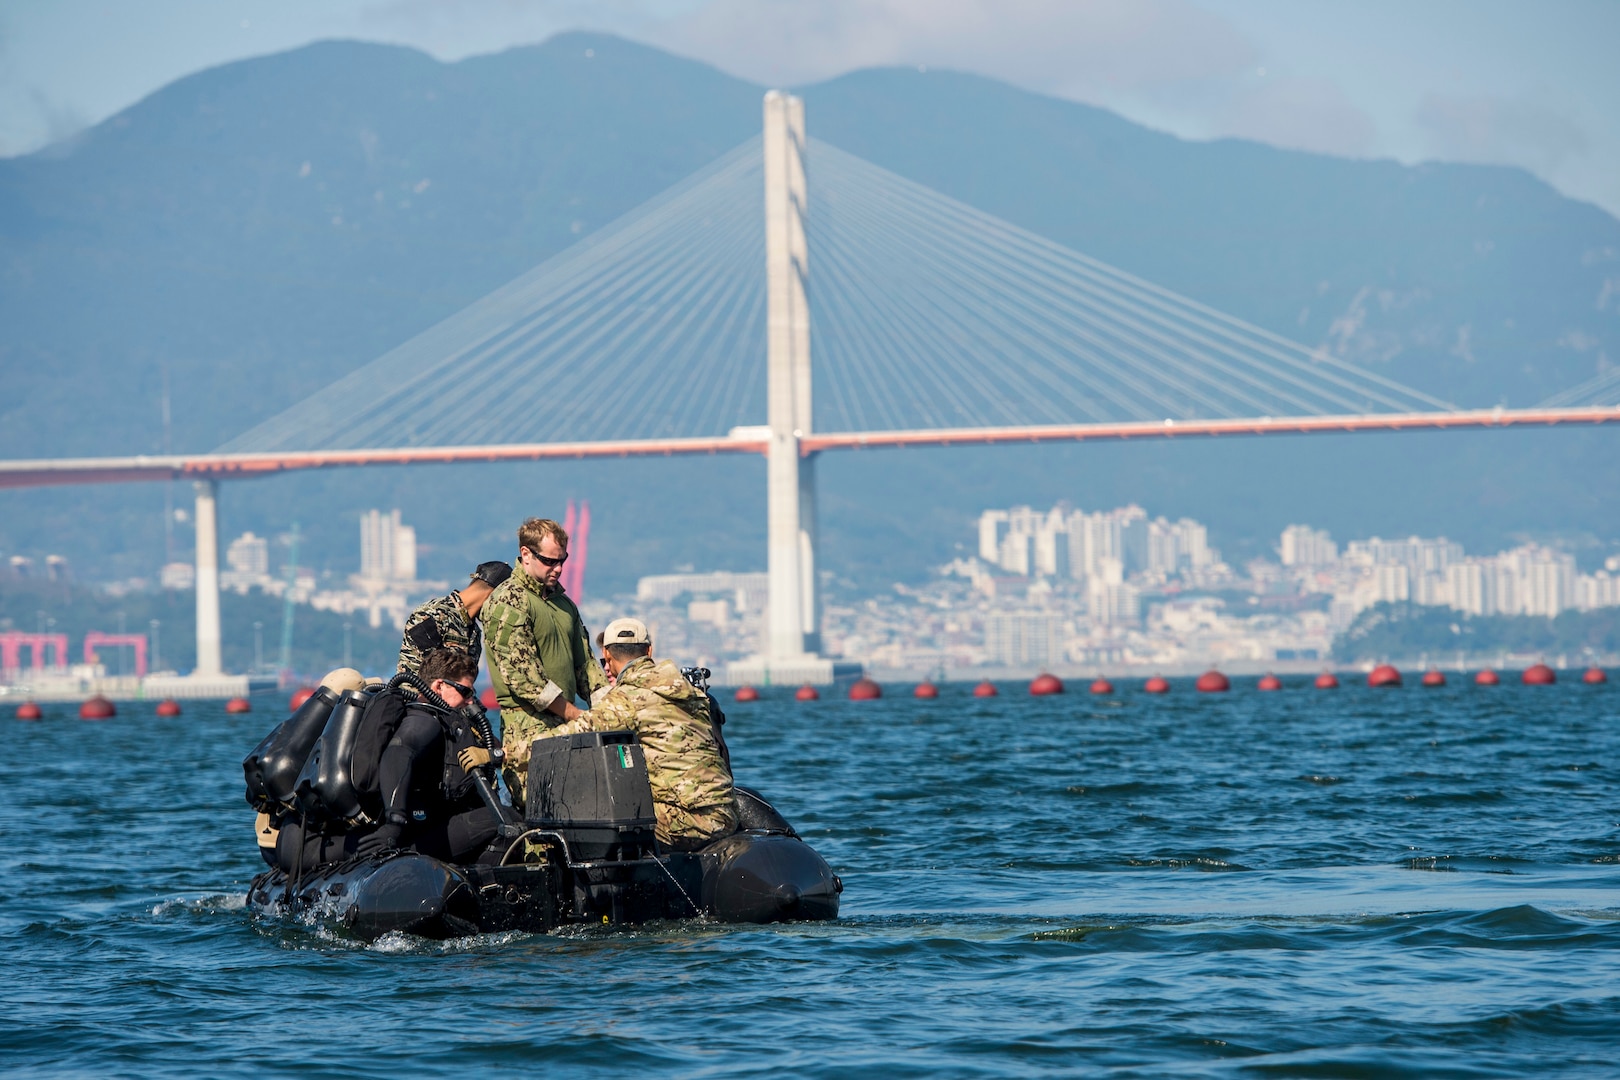 Participants in Clear Horizon conduct diving operations on the waters south of Korea, Oct. 17, 2016. CH16 is a live-action exercise which enhances cooperation and improves capabilities in mine countermeasures operations, with participating nations including Republic of Korea Navy, United States, Australia, Canada, New Zealand, Philippines, Thailand, and the United Kingdom. Navy photo by Petty Officer 2nd Class Daniel Rolston